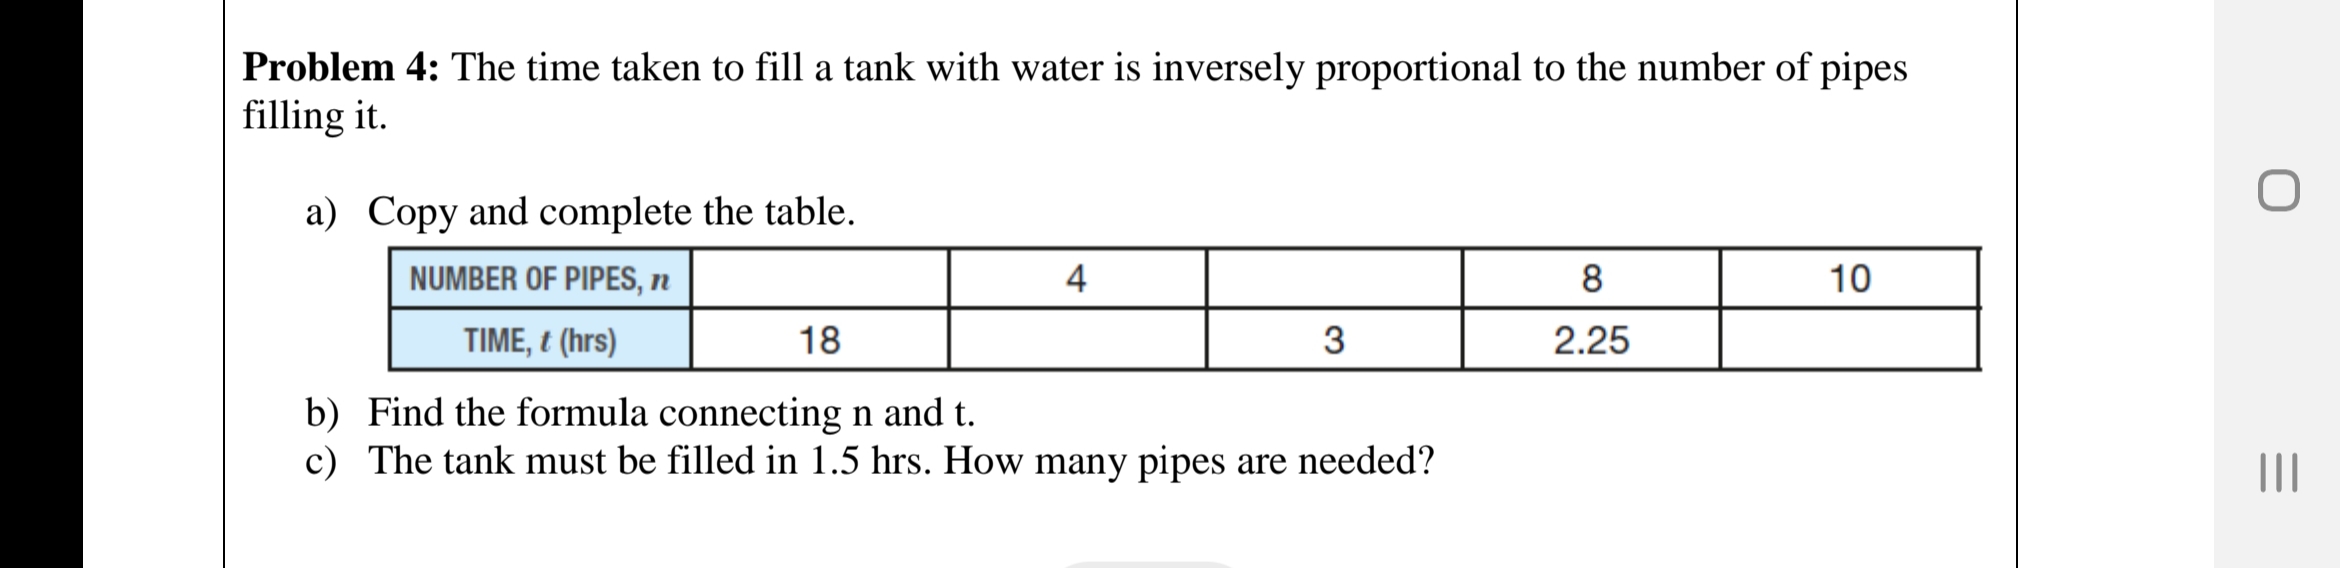 Problem 4: The time taken to fill a tank with water is inversely proportional to the number of pipes
filling it.
a) Copy and complete the table.
NUMBER OF PIPES, n
4
8
10
TIME, t (hrs)
18
3
2.25
b) Find the formula connecting n and t.
c) The tank must be filled in 1.5 hrs. How many pipes are needed?
